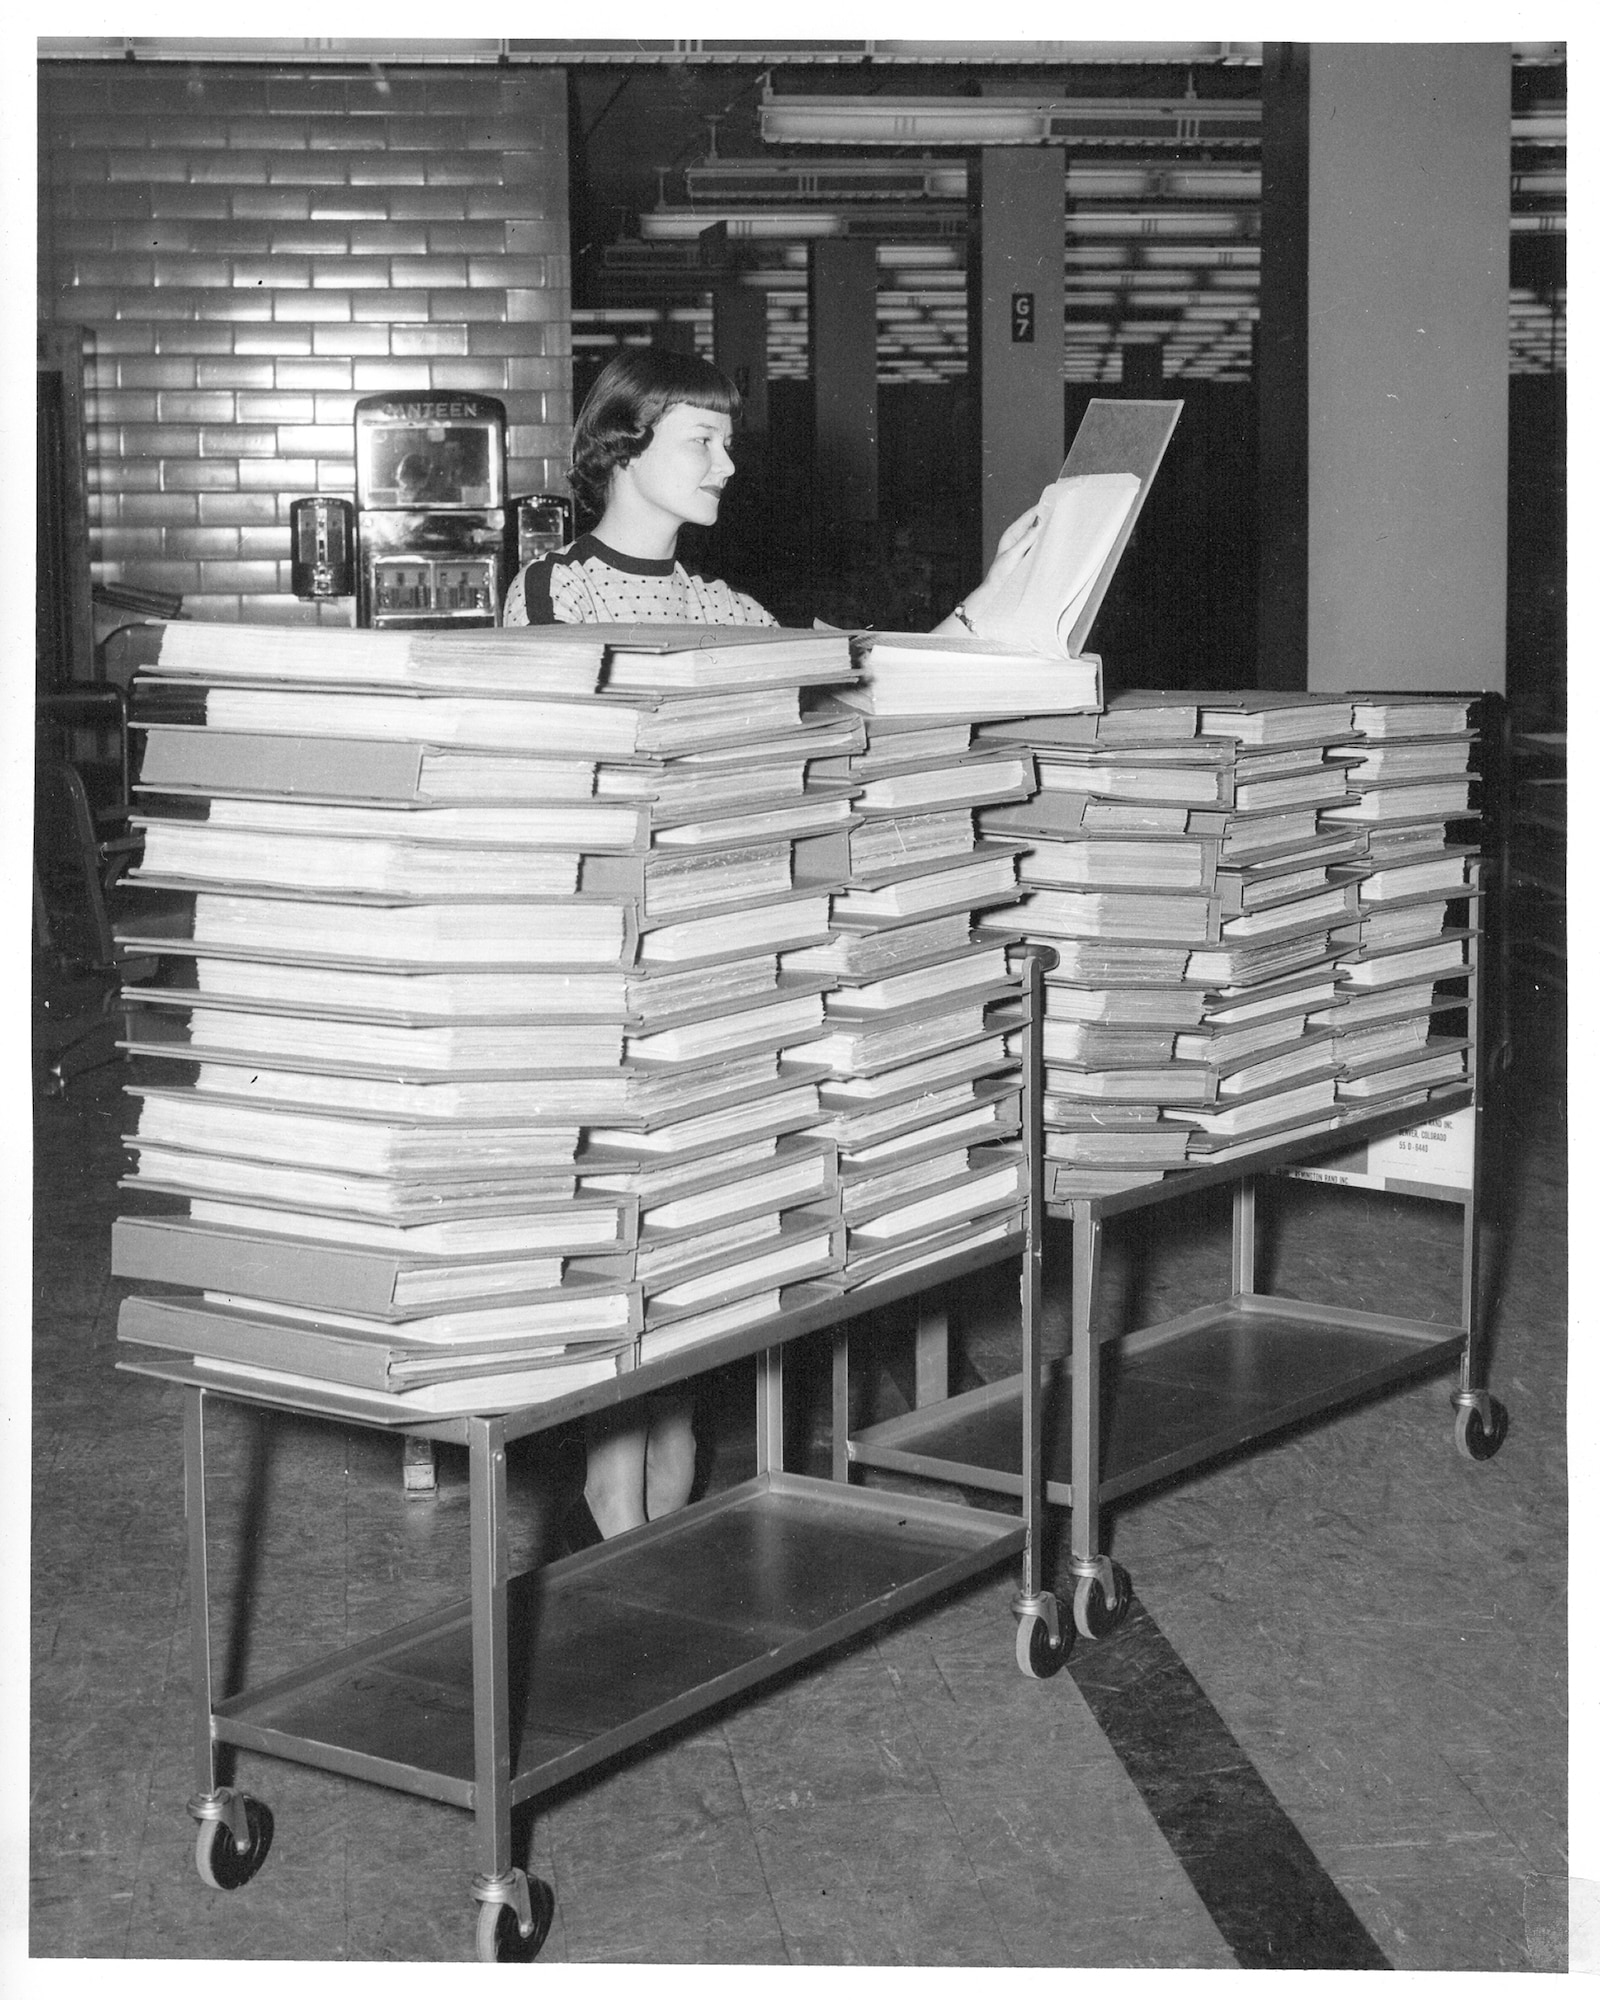 An Air Reserve Records Center employee working with address record books at the York Street building, Denver, Colo., in 1954. ARRC officially opened its doors March 1, 1954, almost 60 years ago. It wasn't until Sept. 1, 1965, that it was renamed the Air Reserve Personnel Center due to increasing involvement in all areas of personnel management and not only records. ARPC will celebrate their 60th birthday on Feb. 28, 2014.